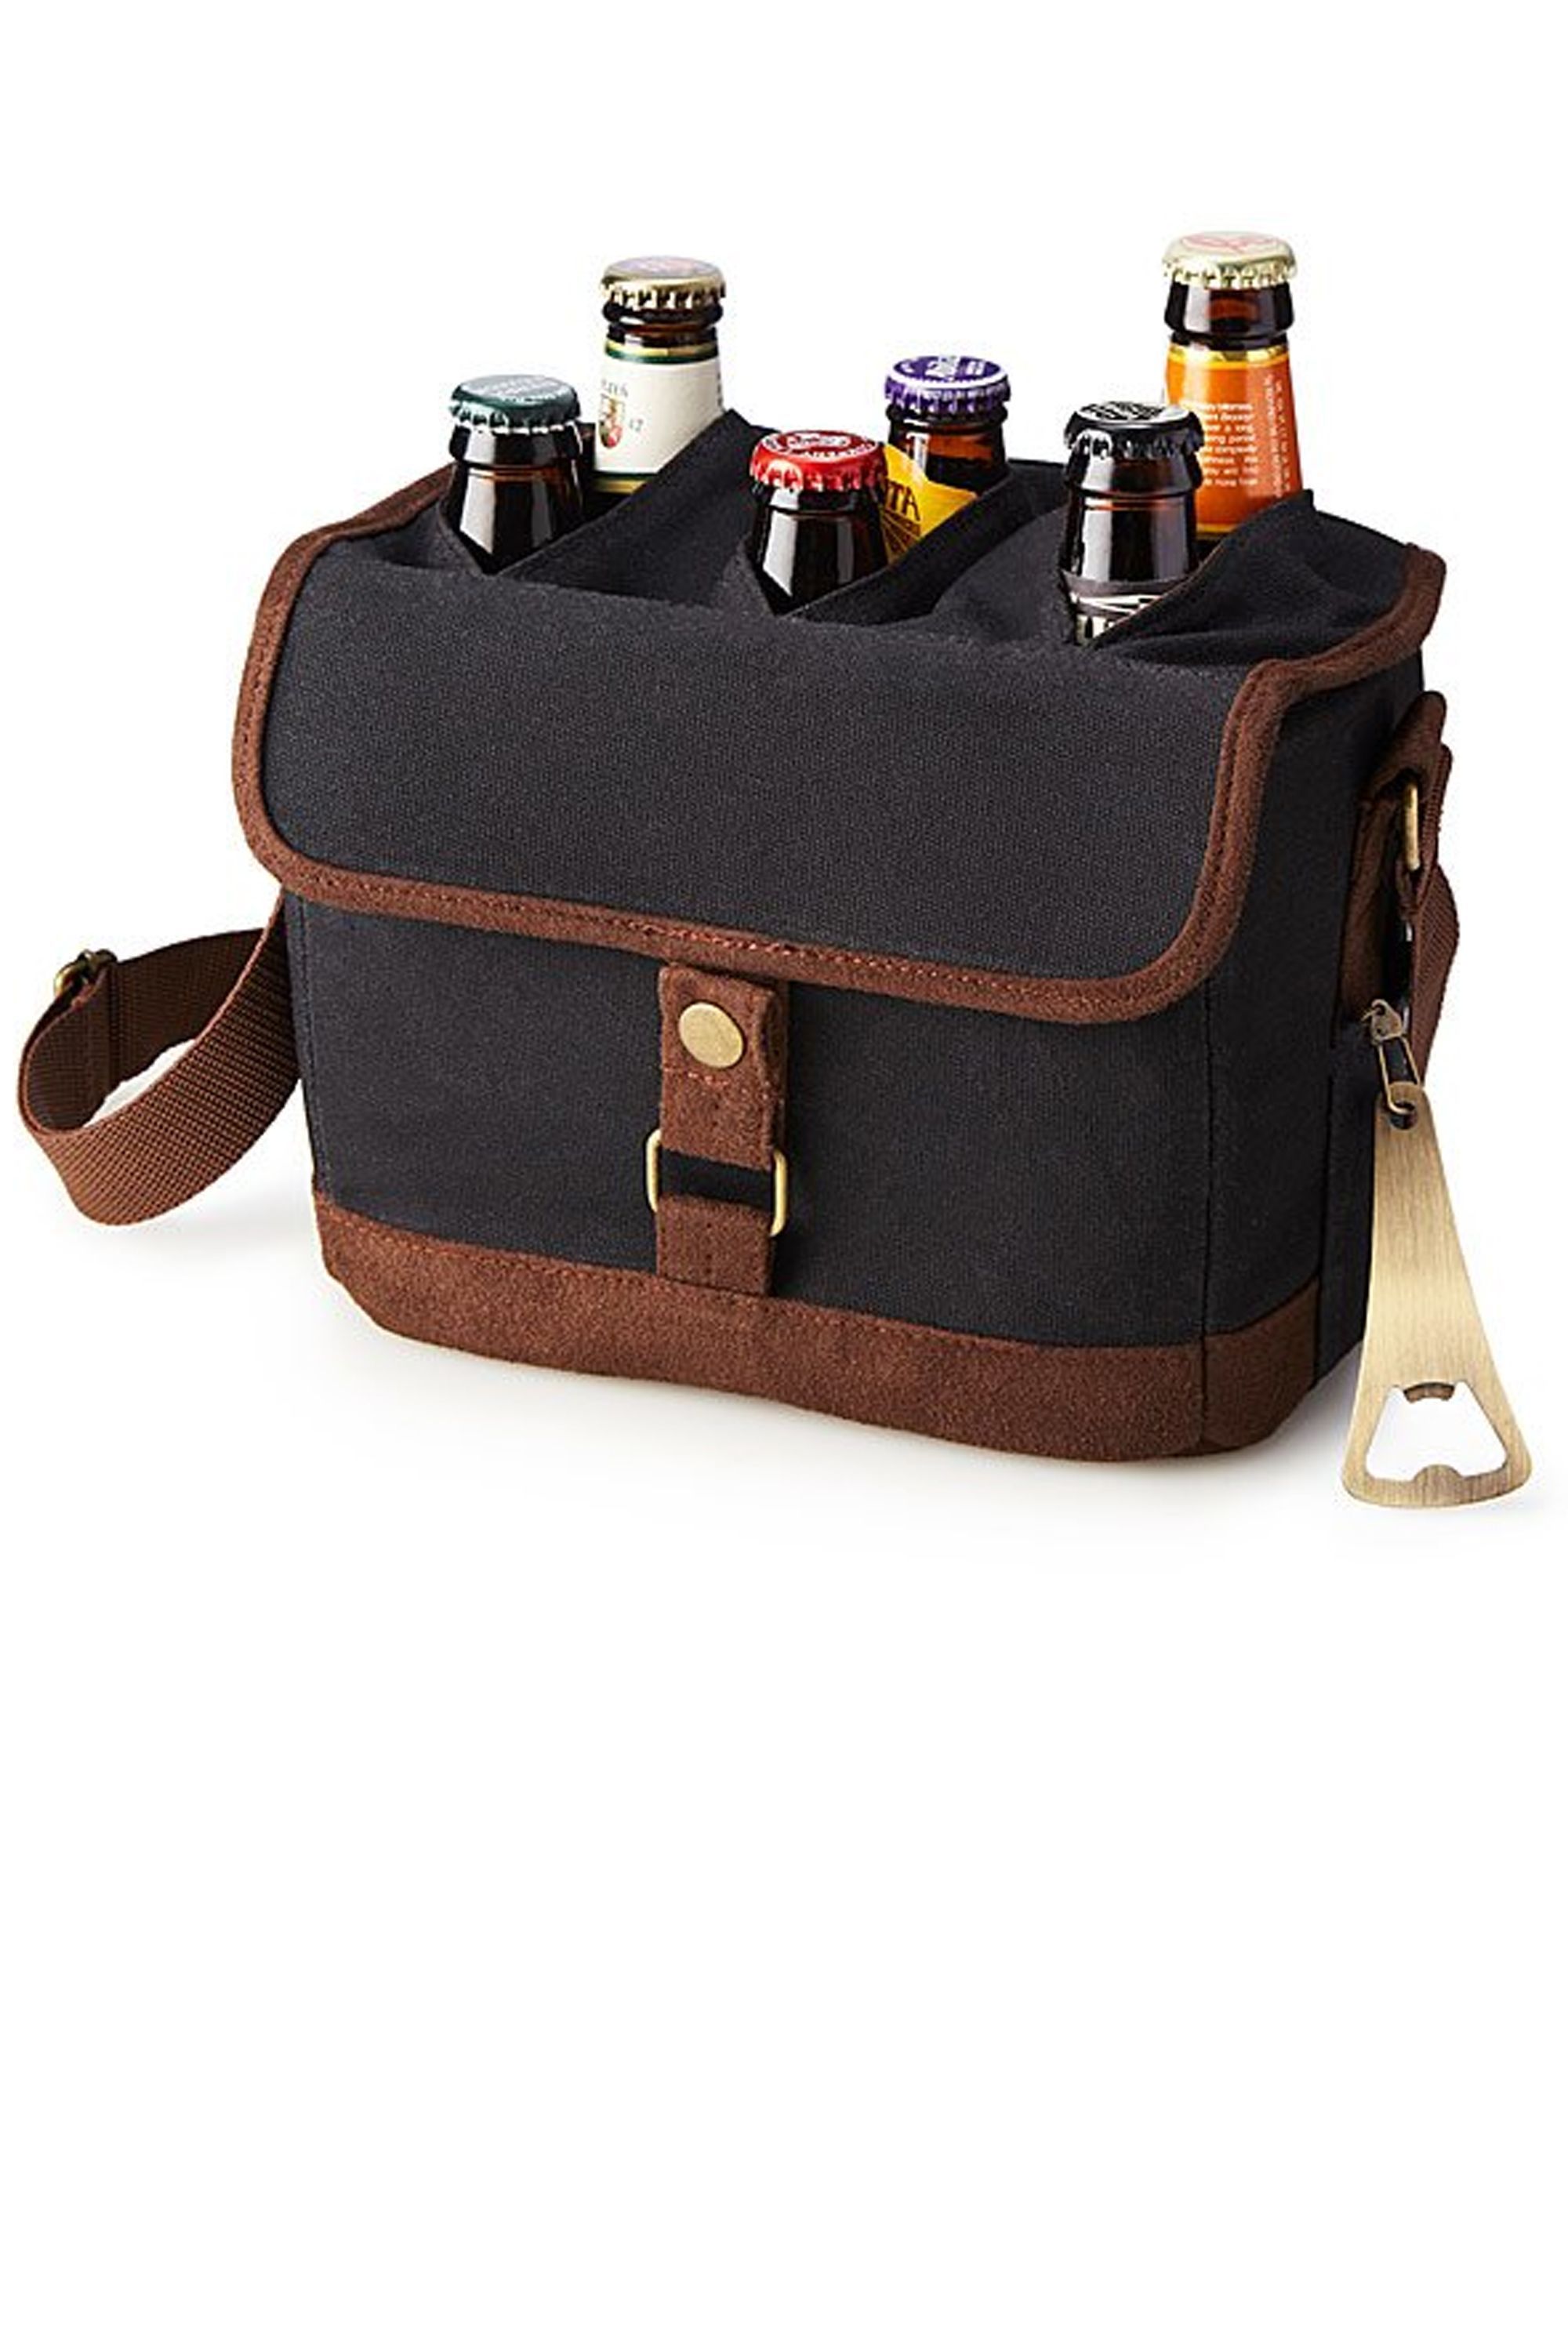 cool gifts for beer lovers